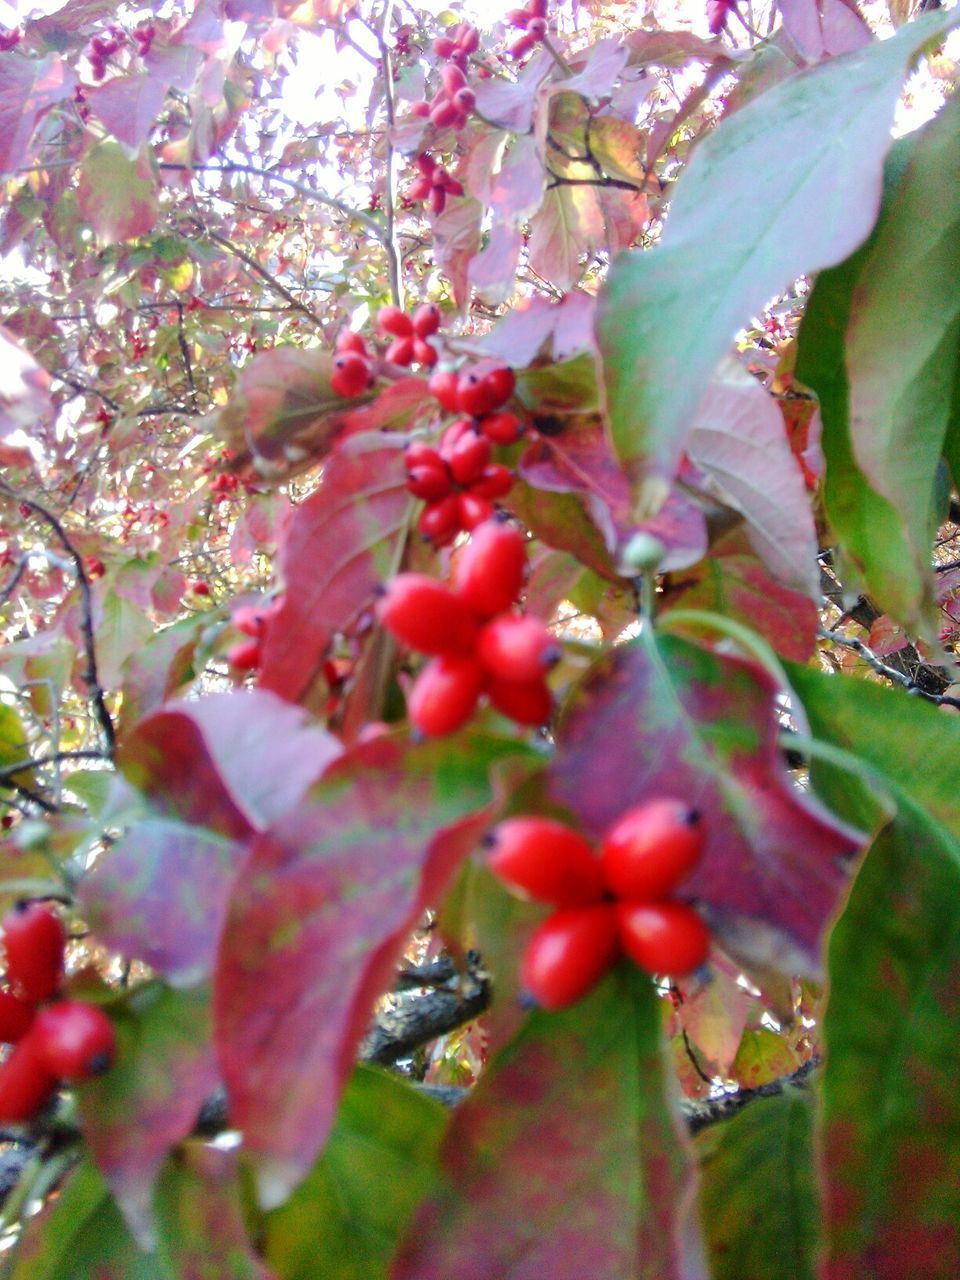 CLOSE-UP OF CHERRY TREE GROWING ON BRANCH